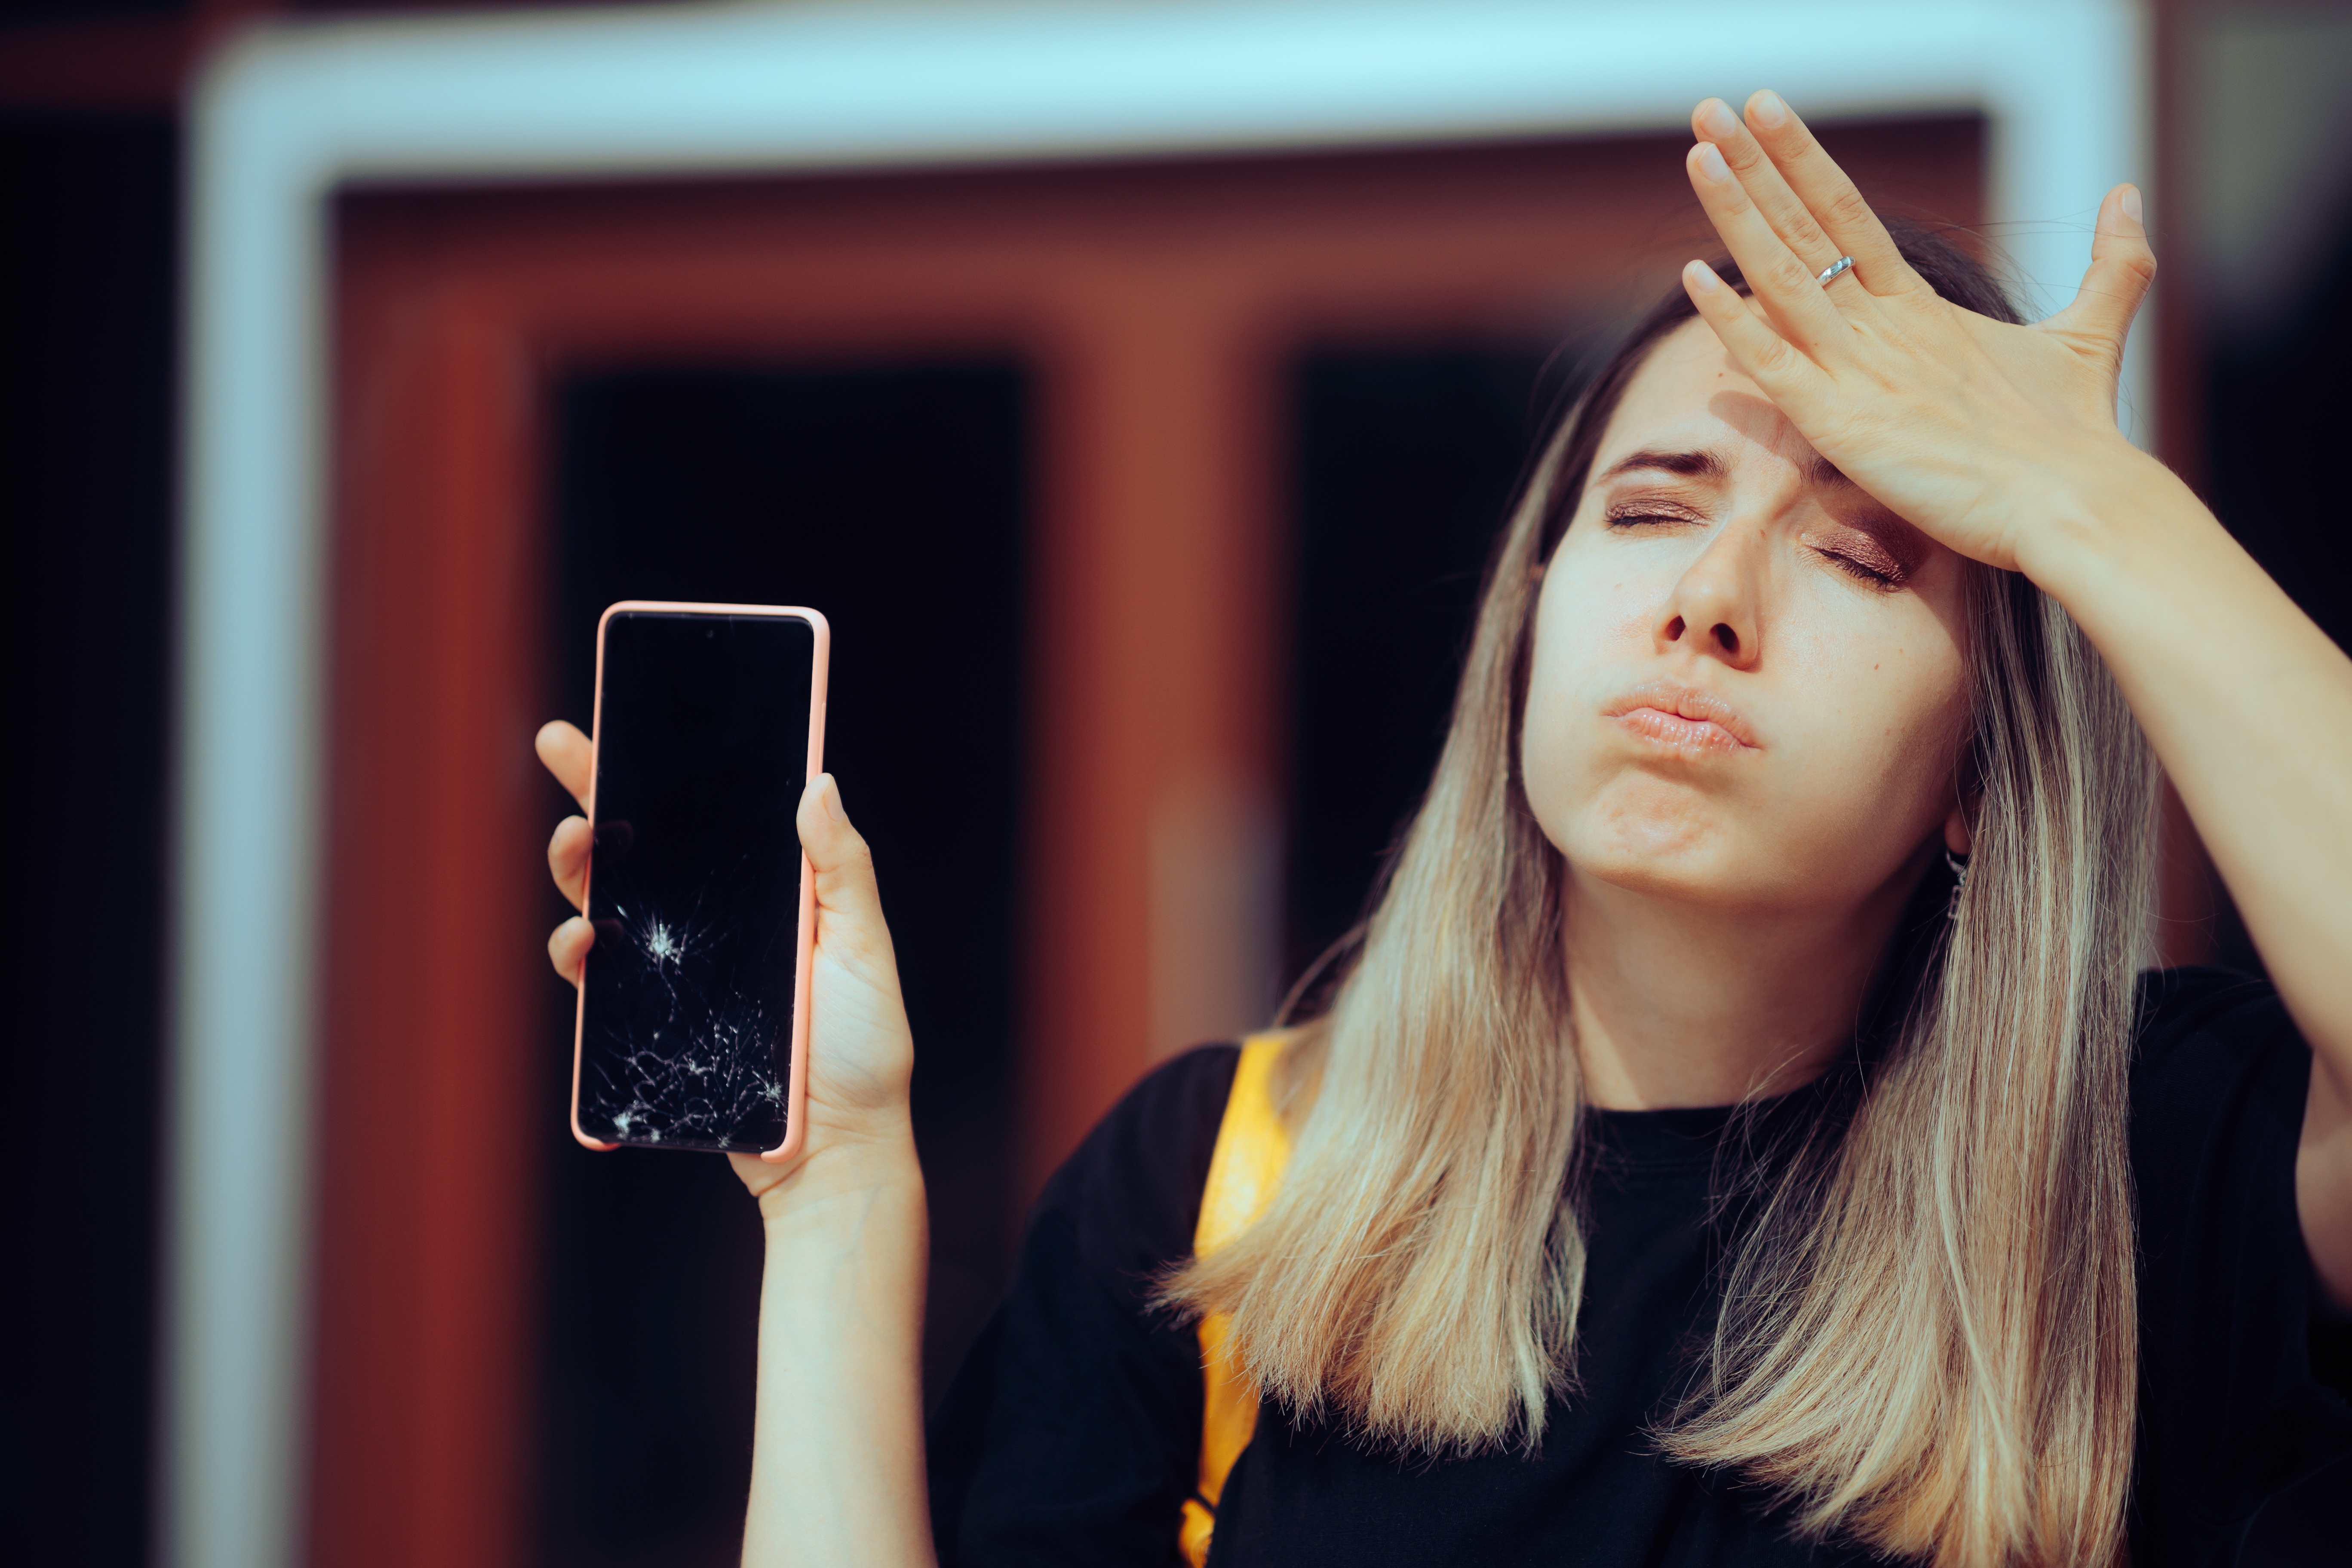 Woman holding her smartphone that has a cracked screen